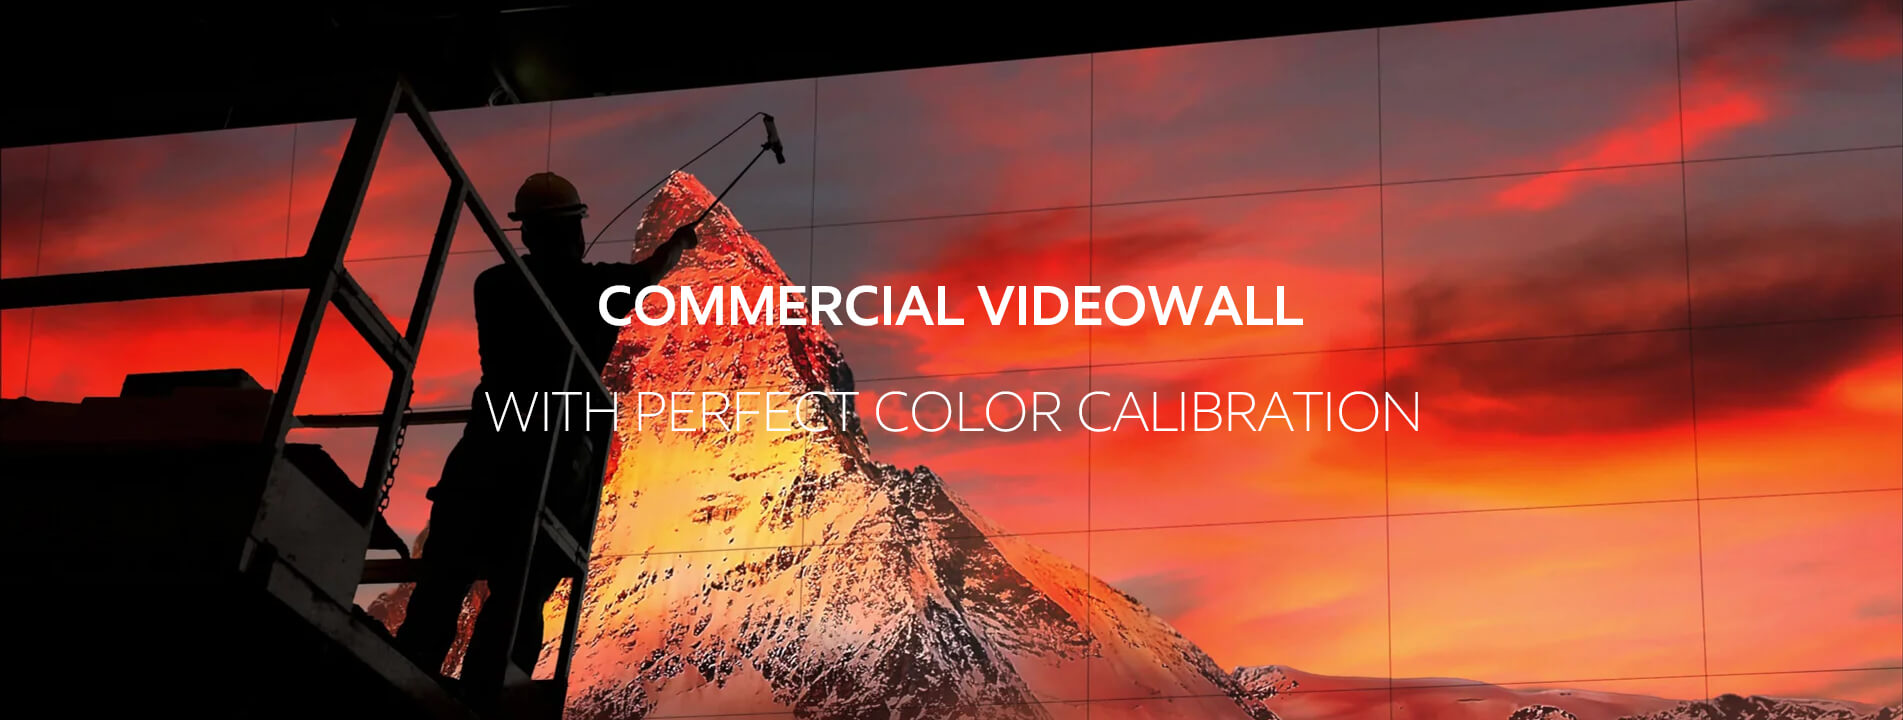 COMMERCIAL VIDEO WALL